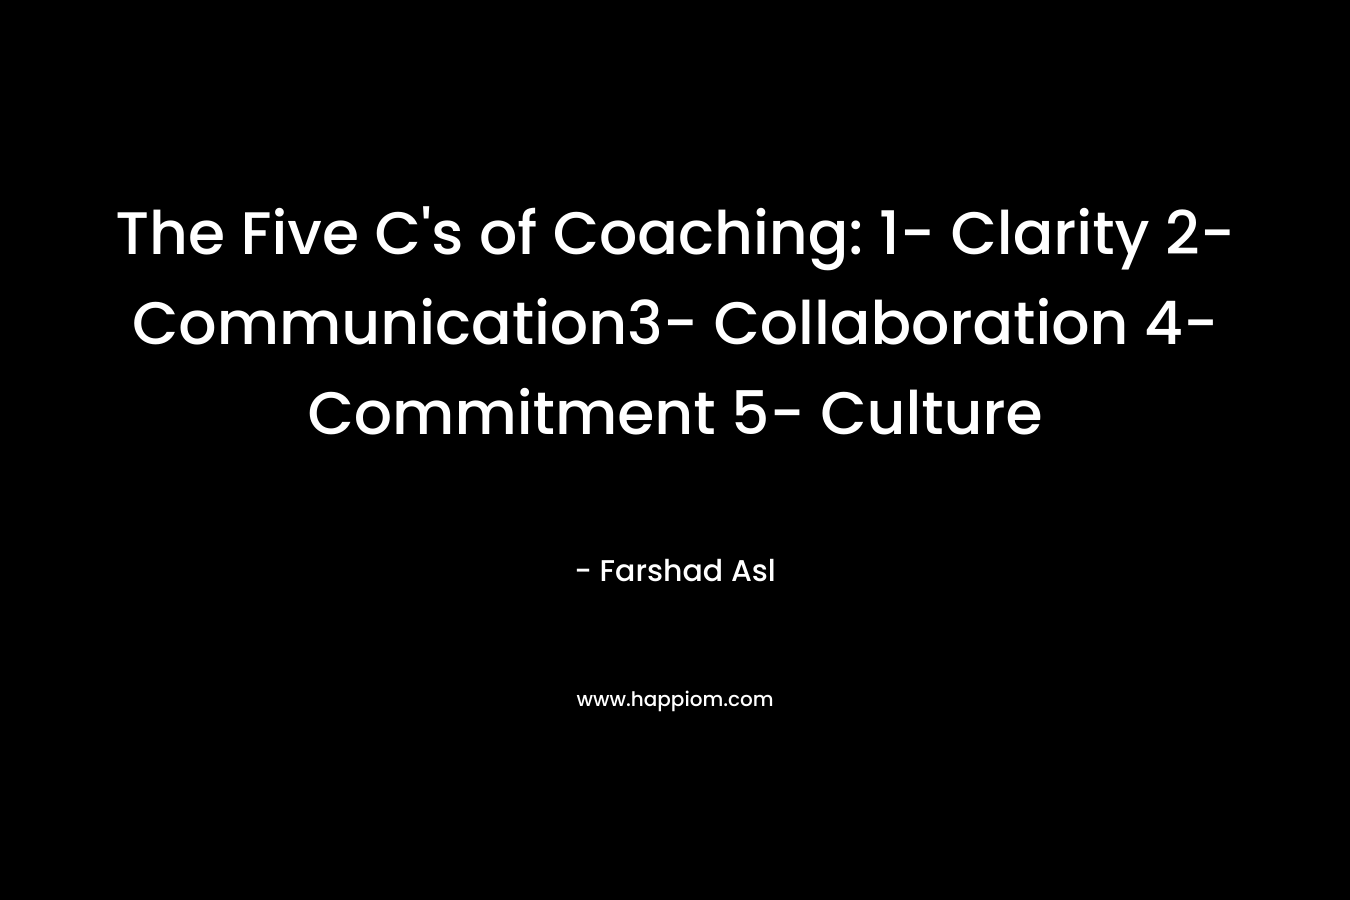 The Five C's of Coaching: 1- Clarity 2- Communication3- Collaboration 4- Commitment 5- Culture